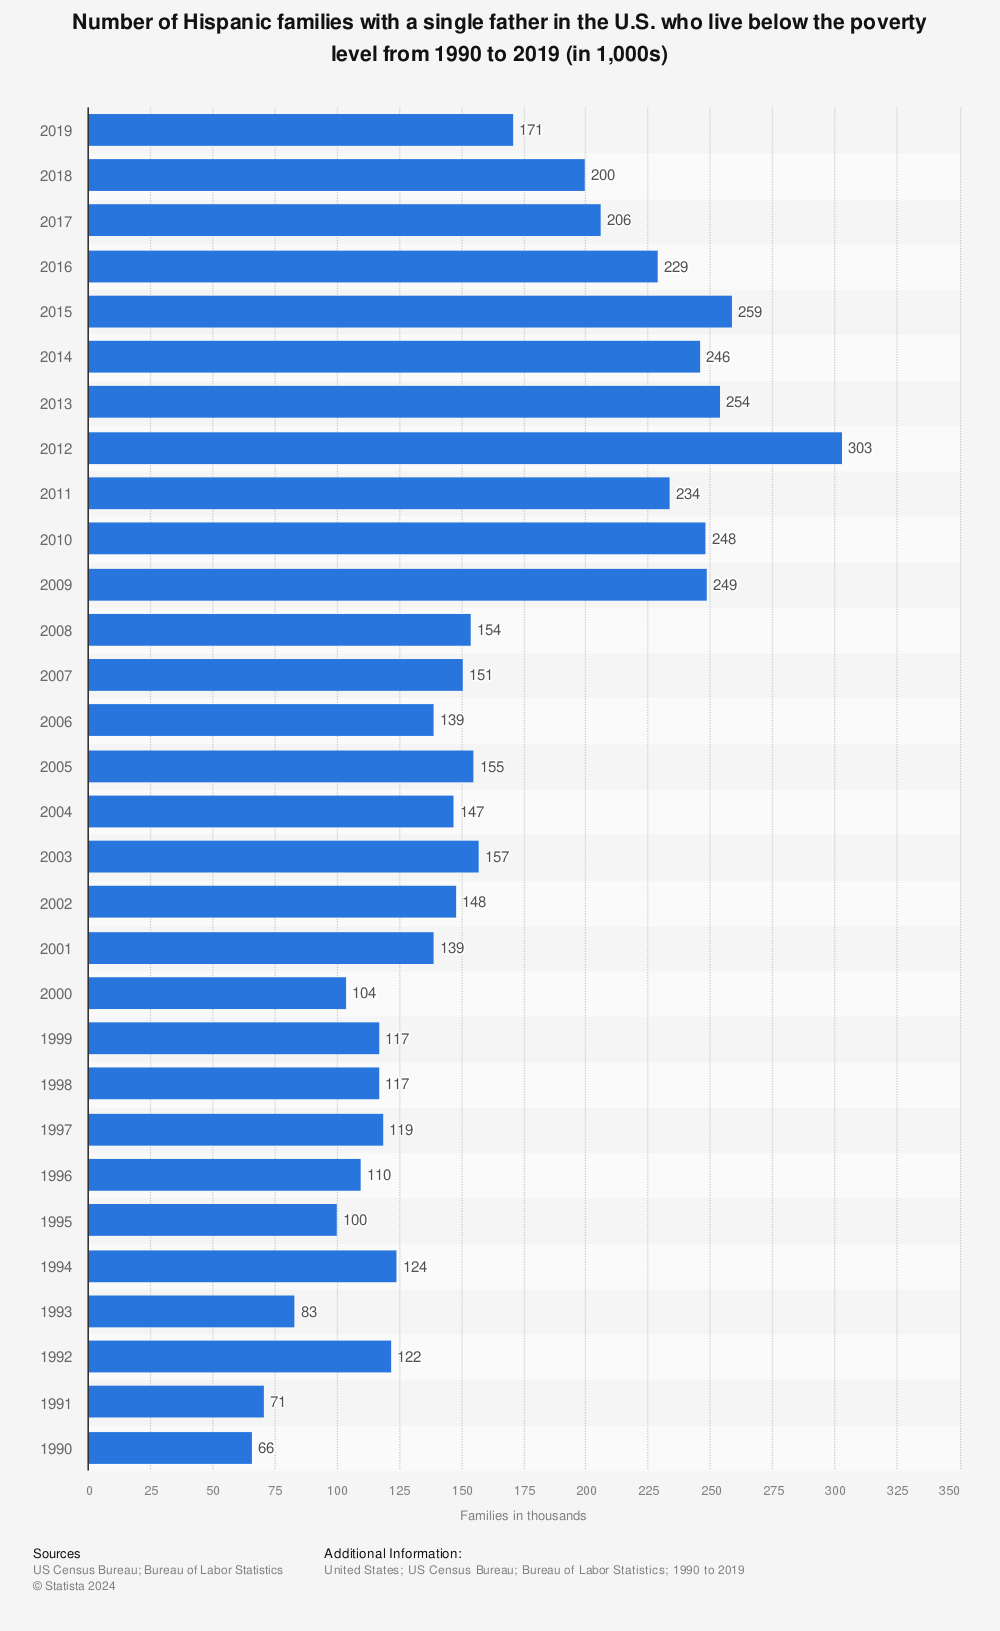 Statistic: Number of Hispanic families with a single father in the U.S. who live below the poverty level from 1990 to 2019 (in 1,000s) | Statista